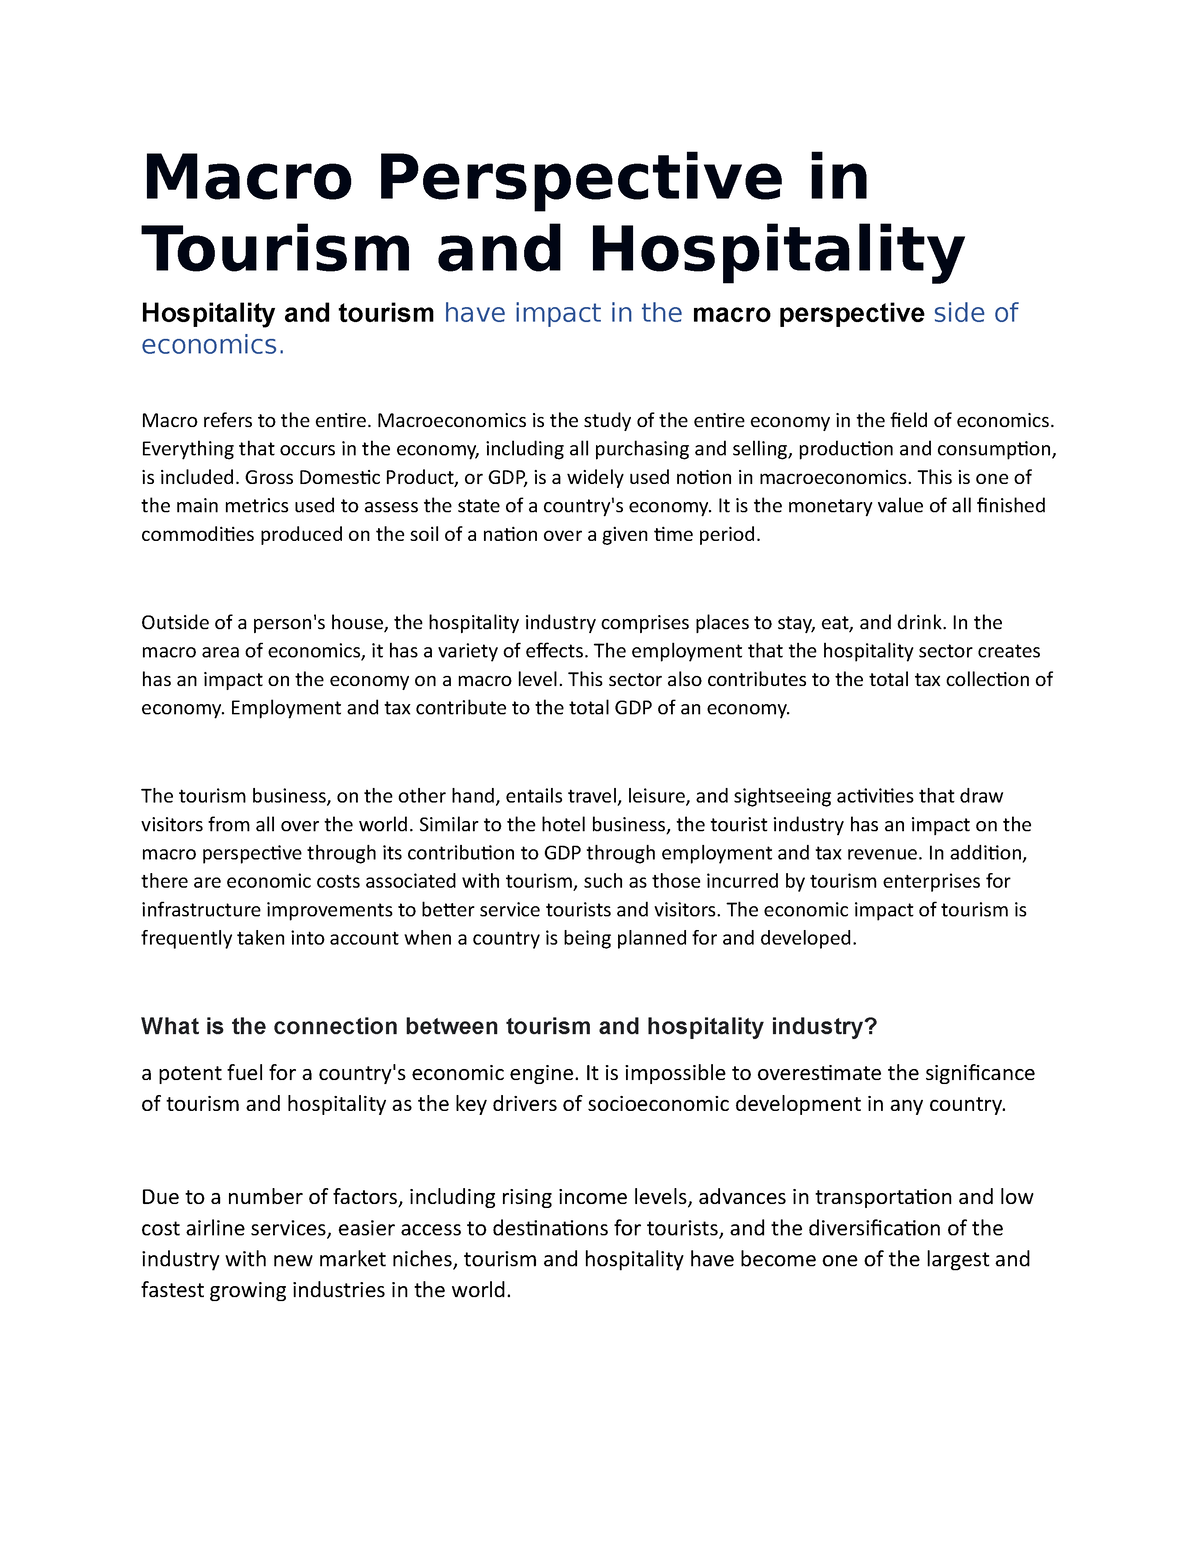 essay about macro perspective of tourism and hospitality